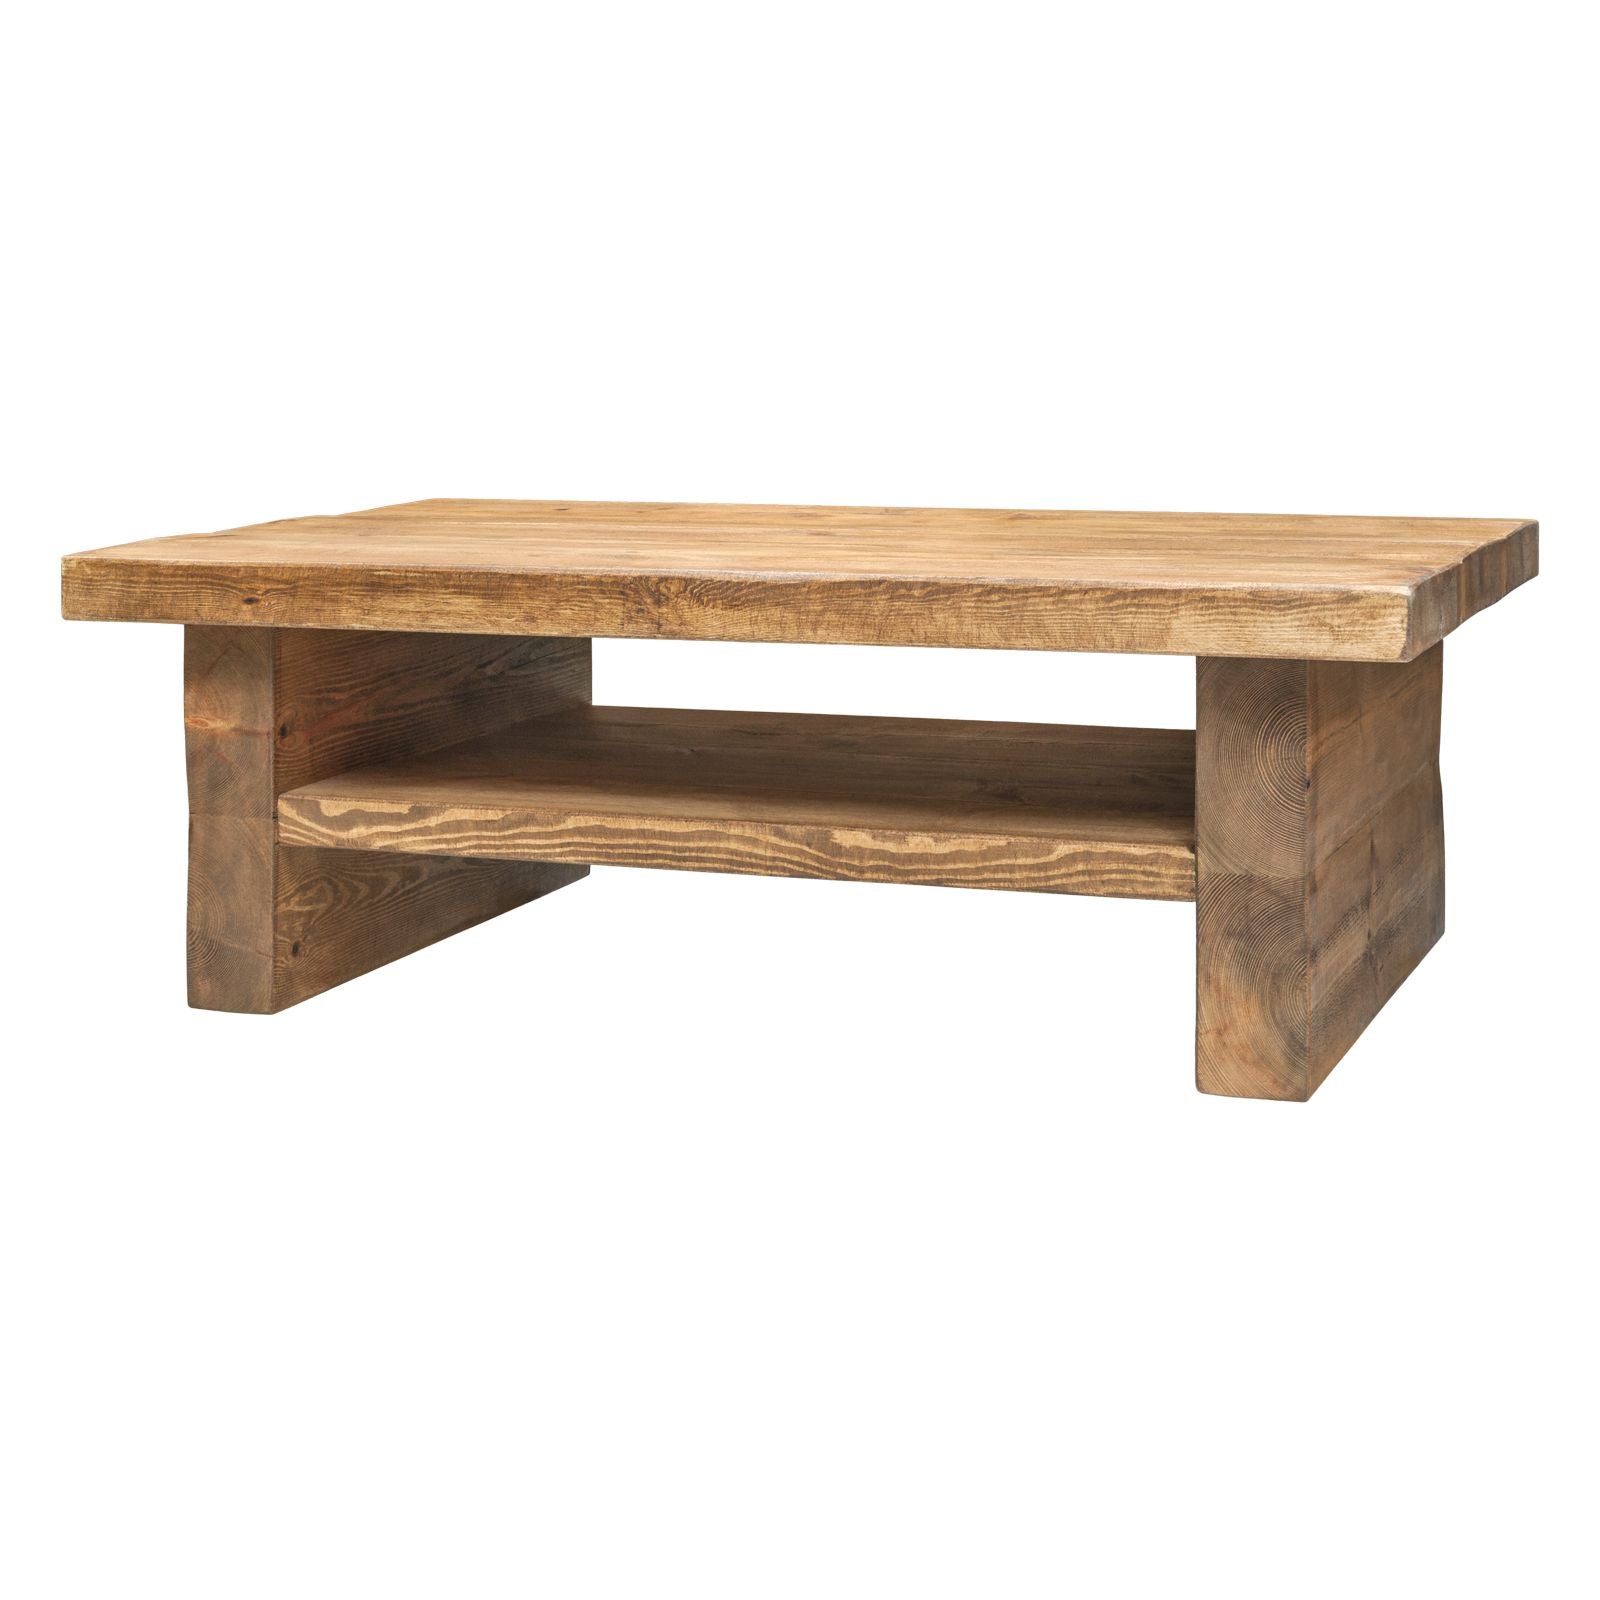 Chopwell Tall Coffee Table With Storage